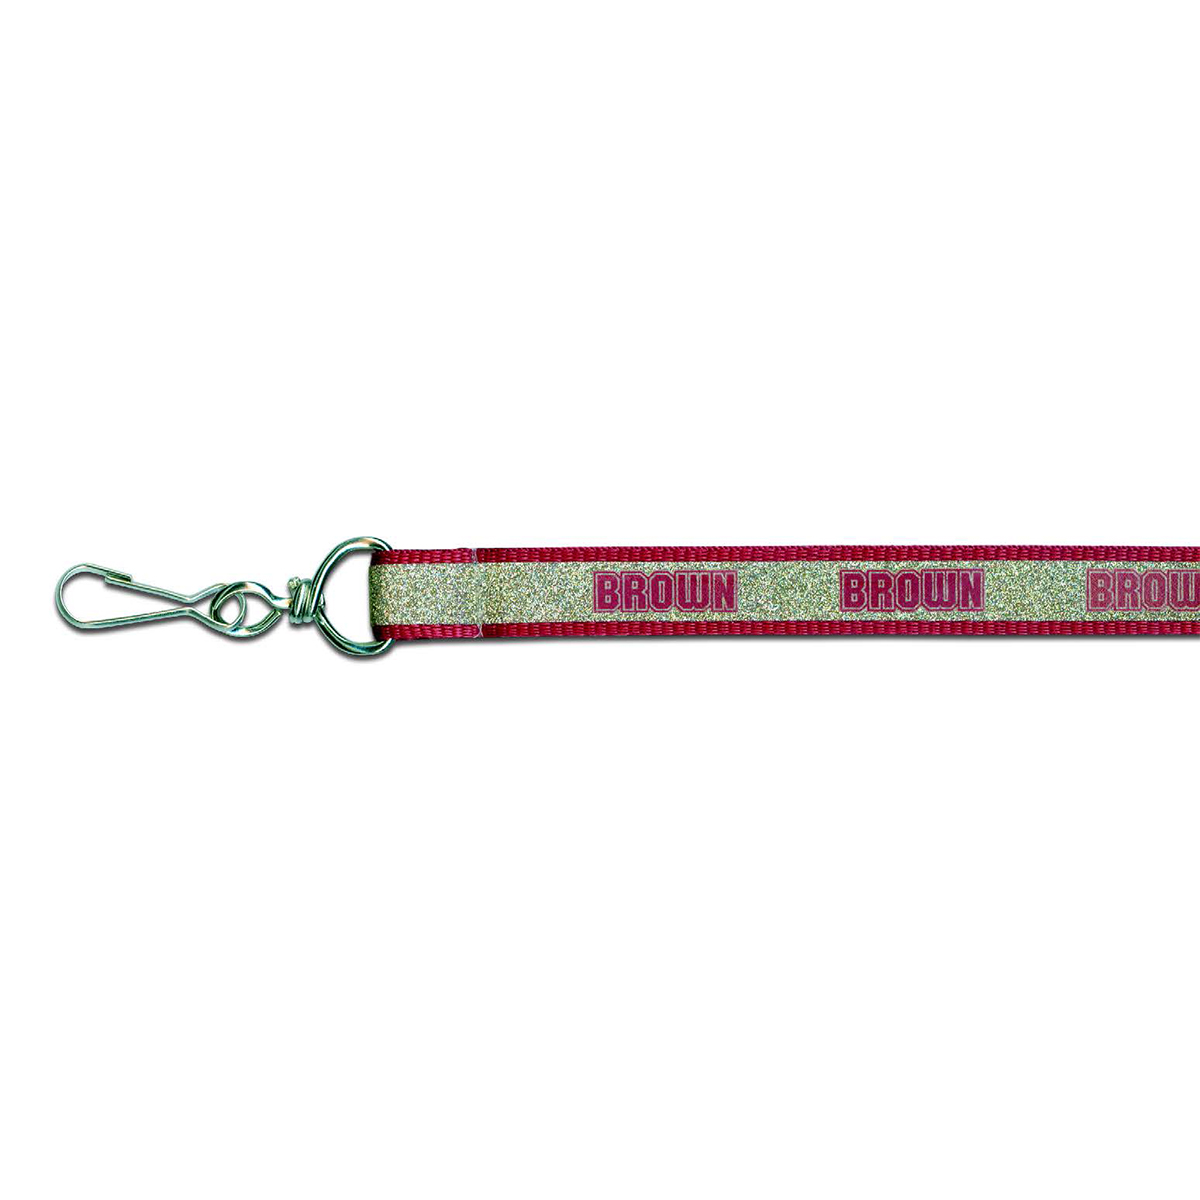 Printed Glitter Lanyards | Catania Medallic Specialty, Inc.